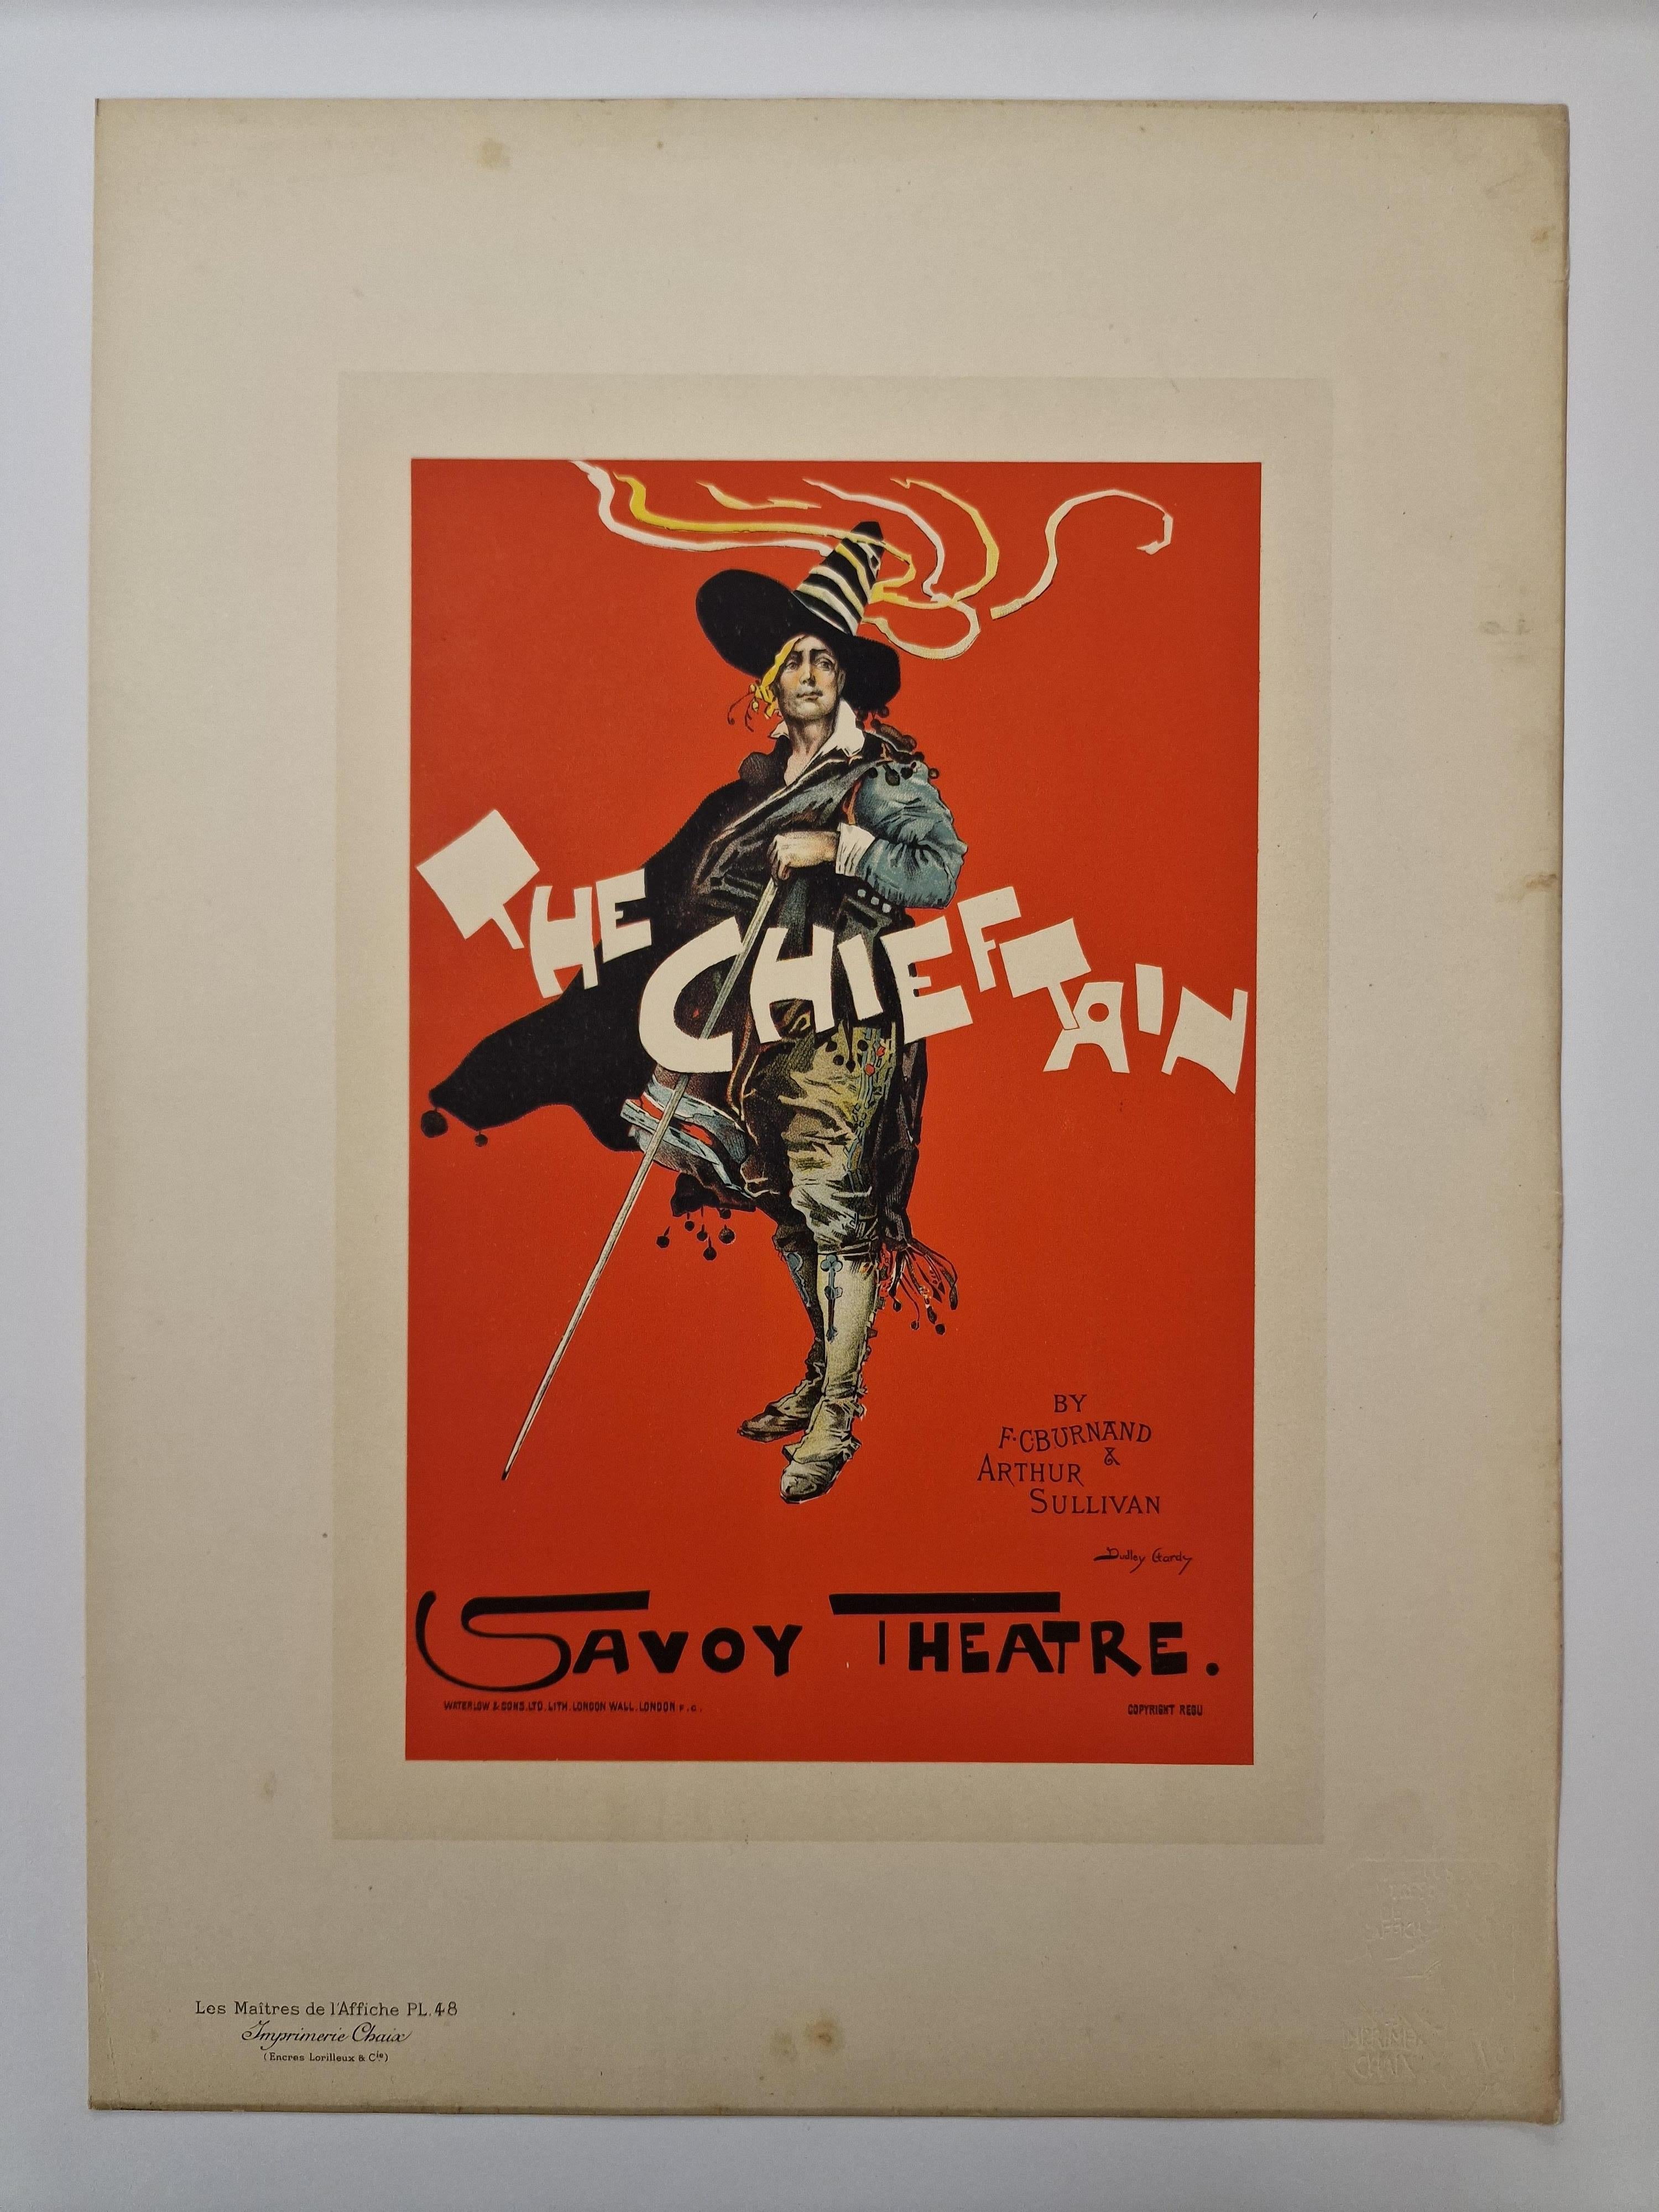 The Chieftain - Print by Dudley Hardy